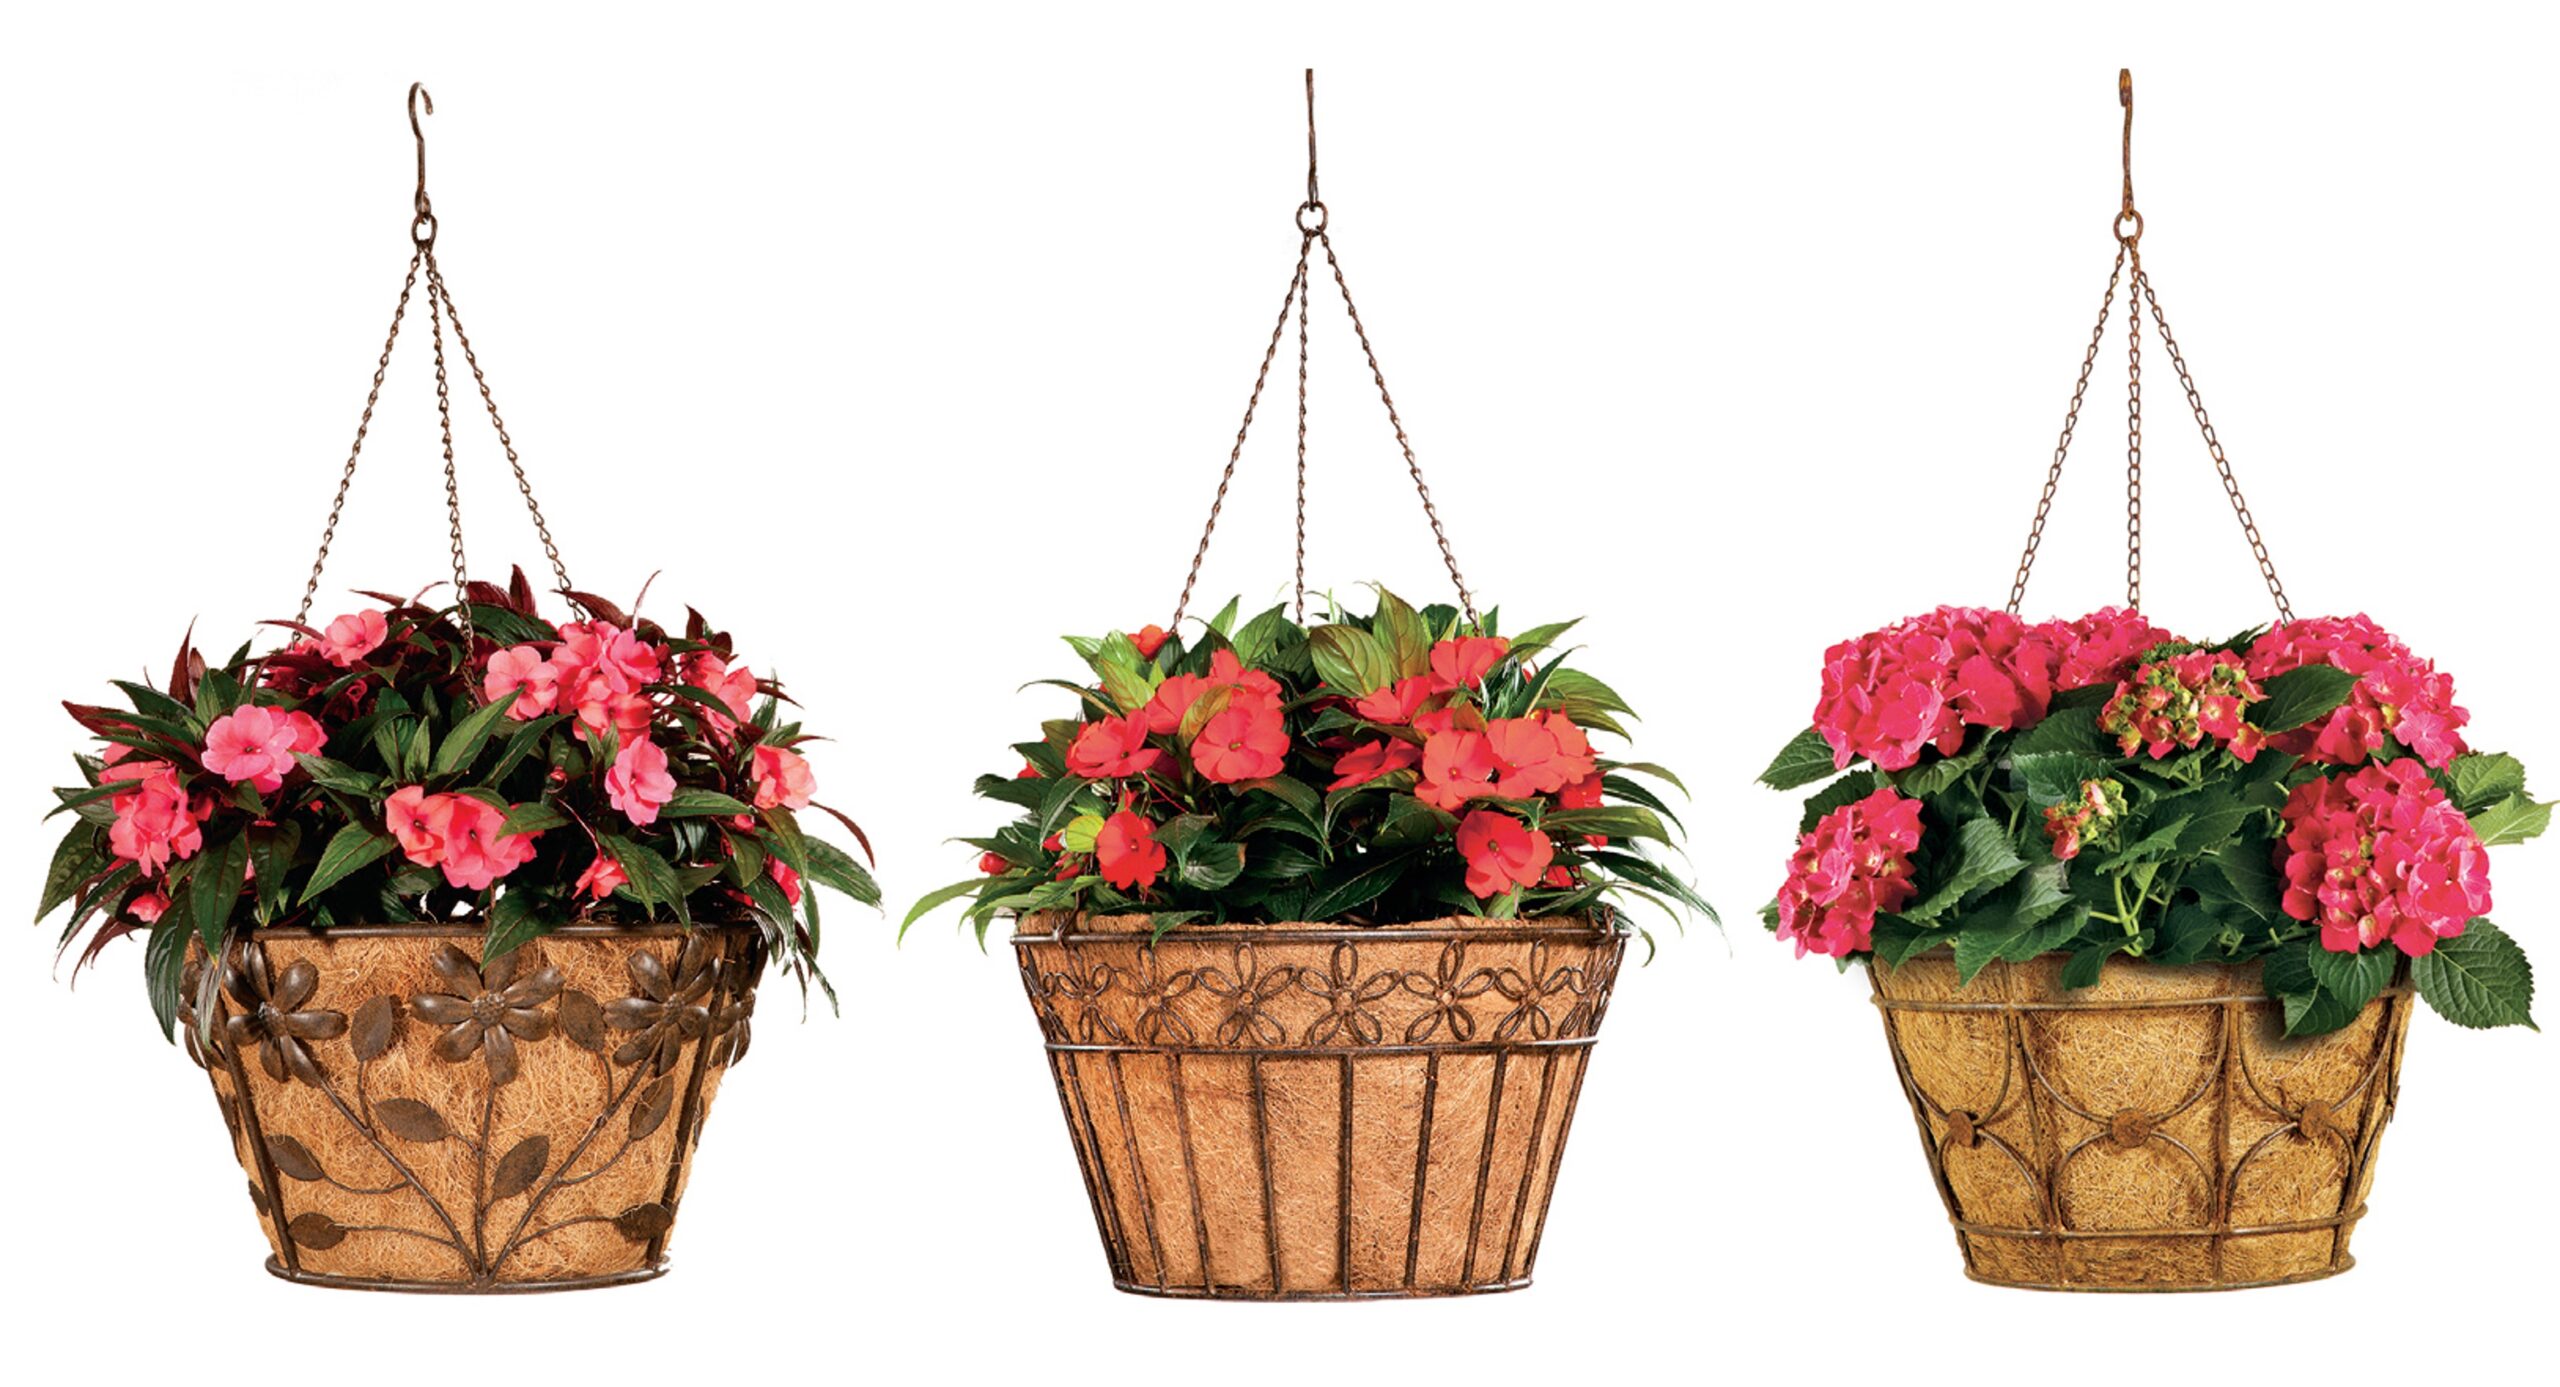 Deer Park Ironworks 16" Floral, Daisy, and Arch Hanging Baskets w/ Coco Liner - Set of 3